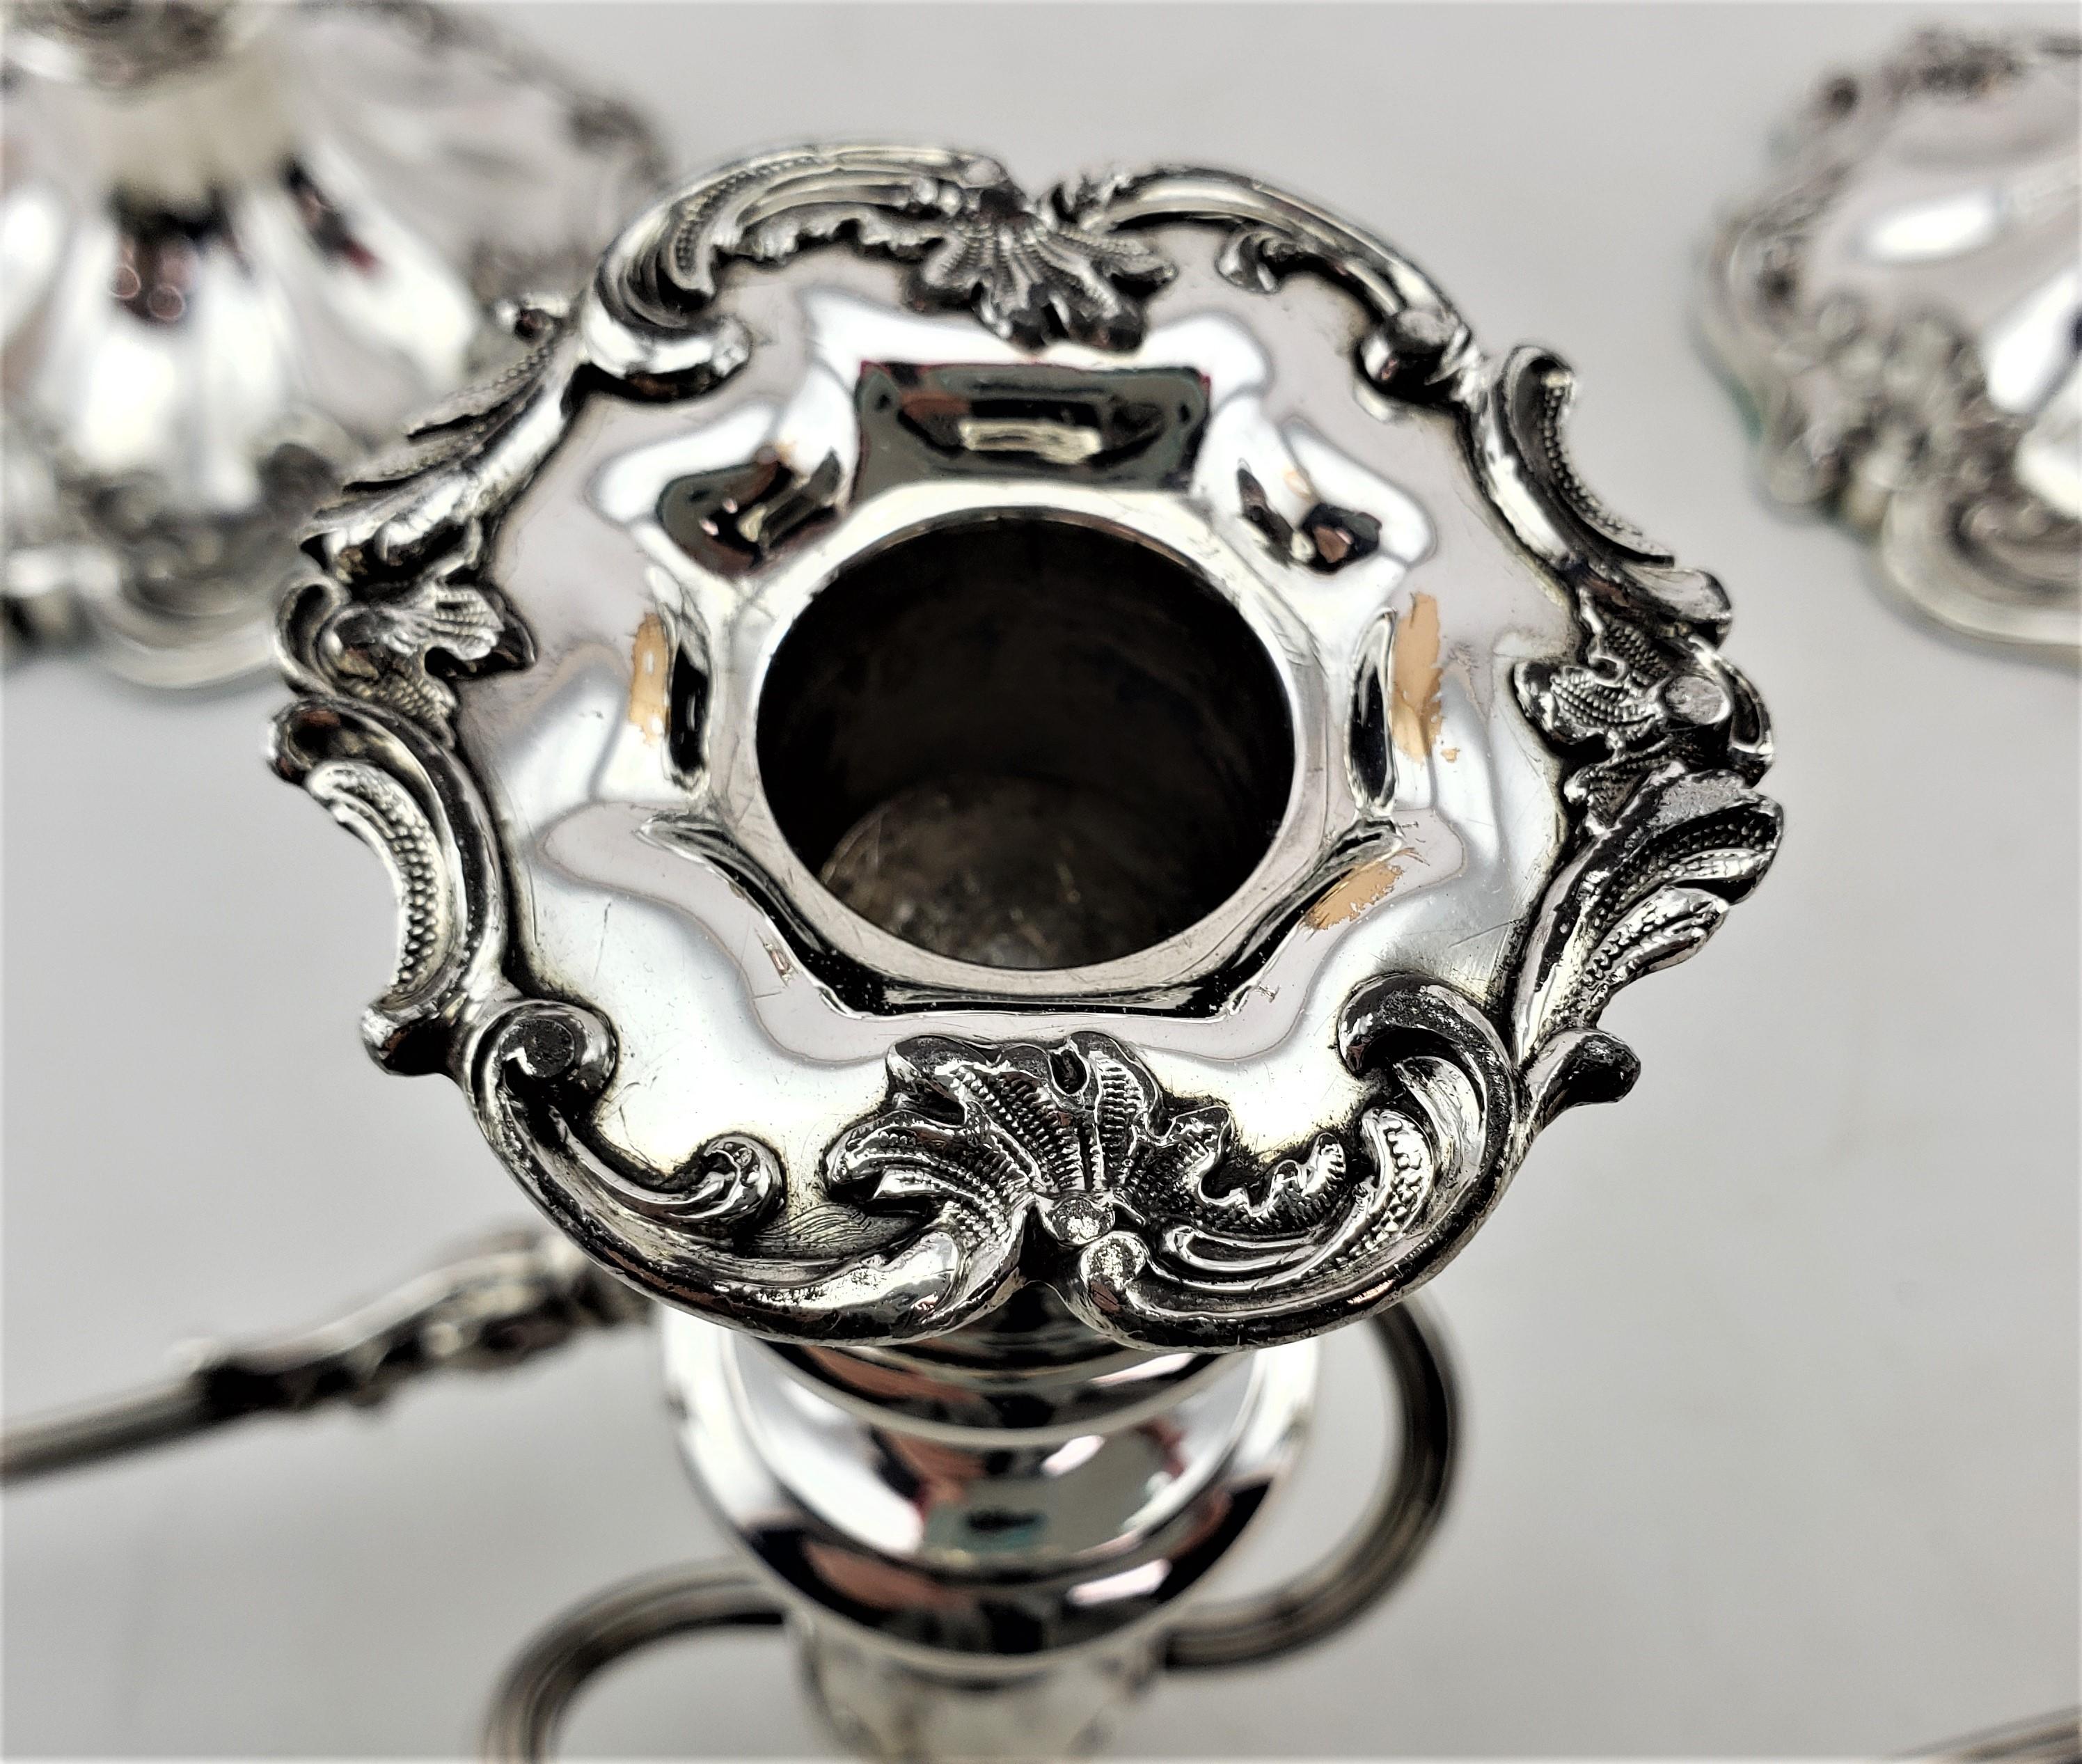 Antique Silver Plated Convertible Candelabras or Candlesticks with Leaf Decor For Sale 5